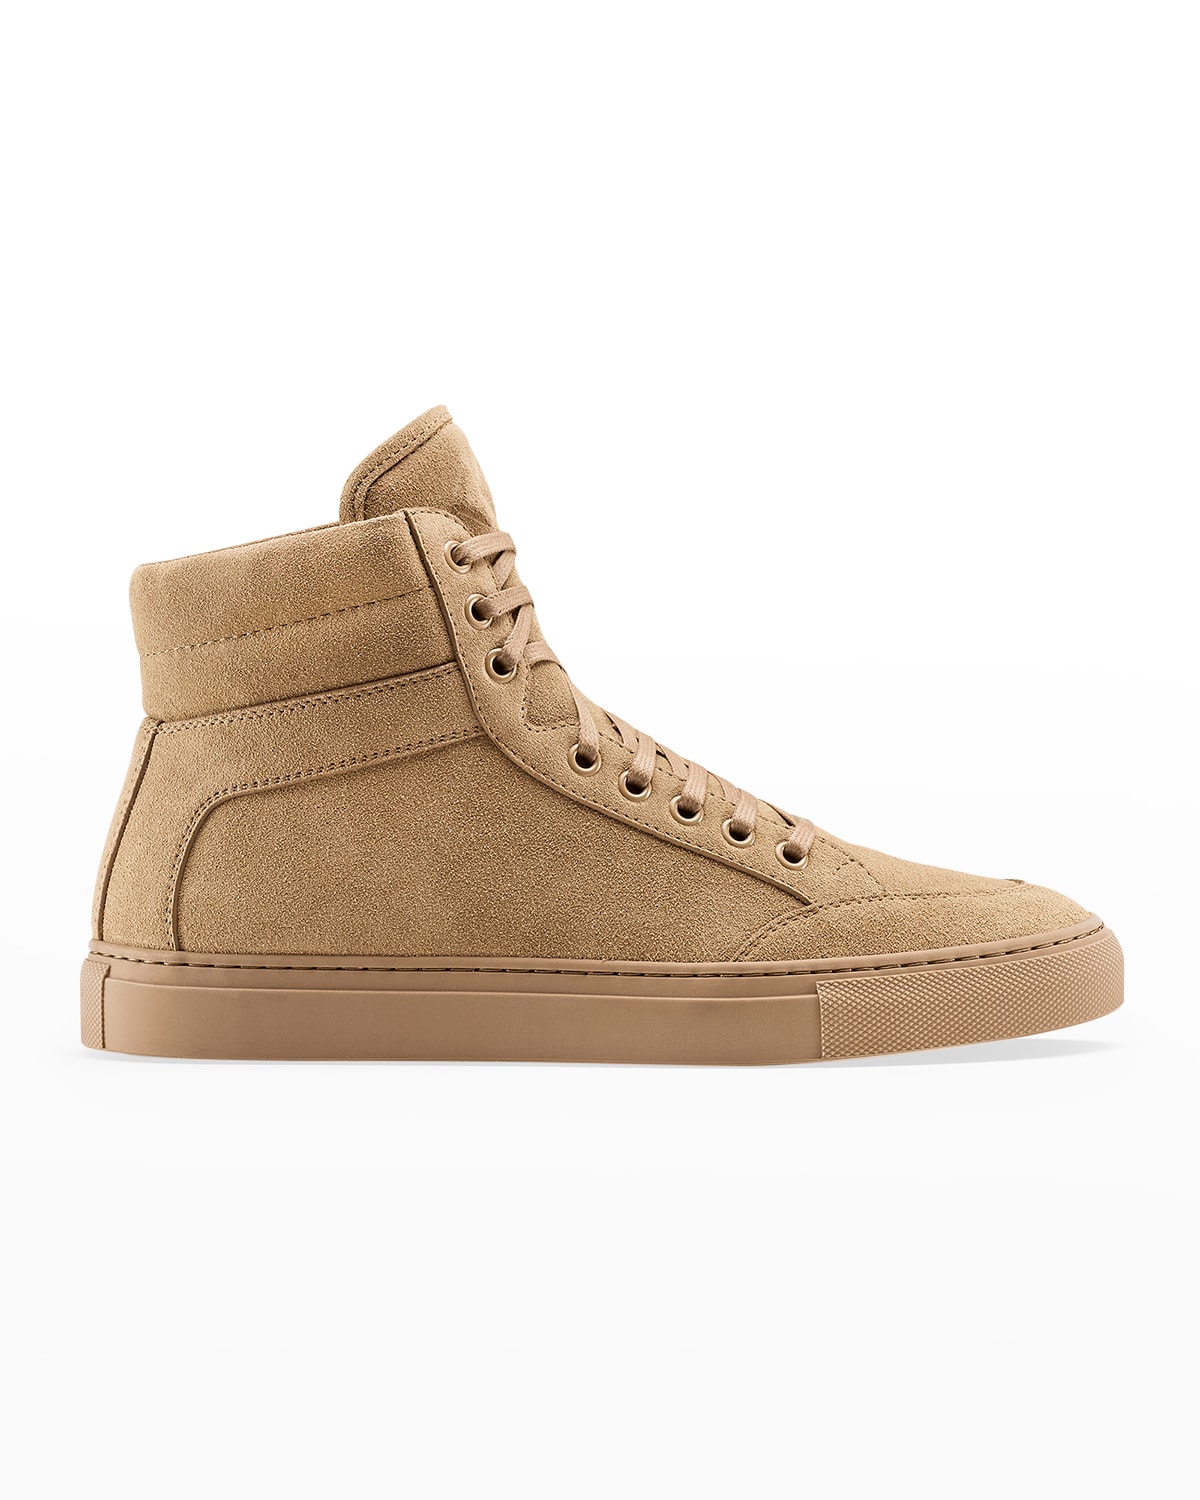 Koio Primo Suede High-Top Sneakers